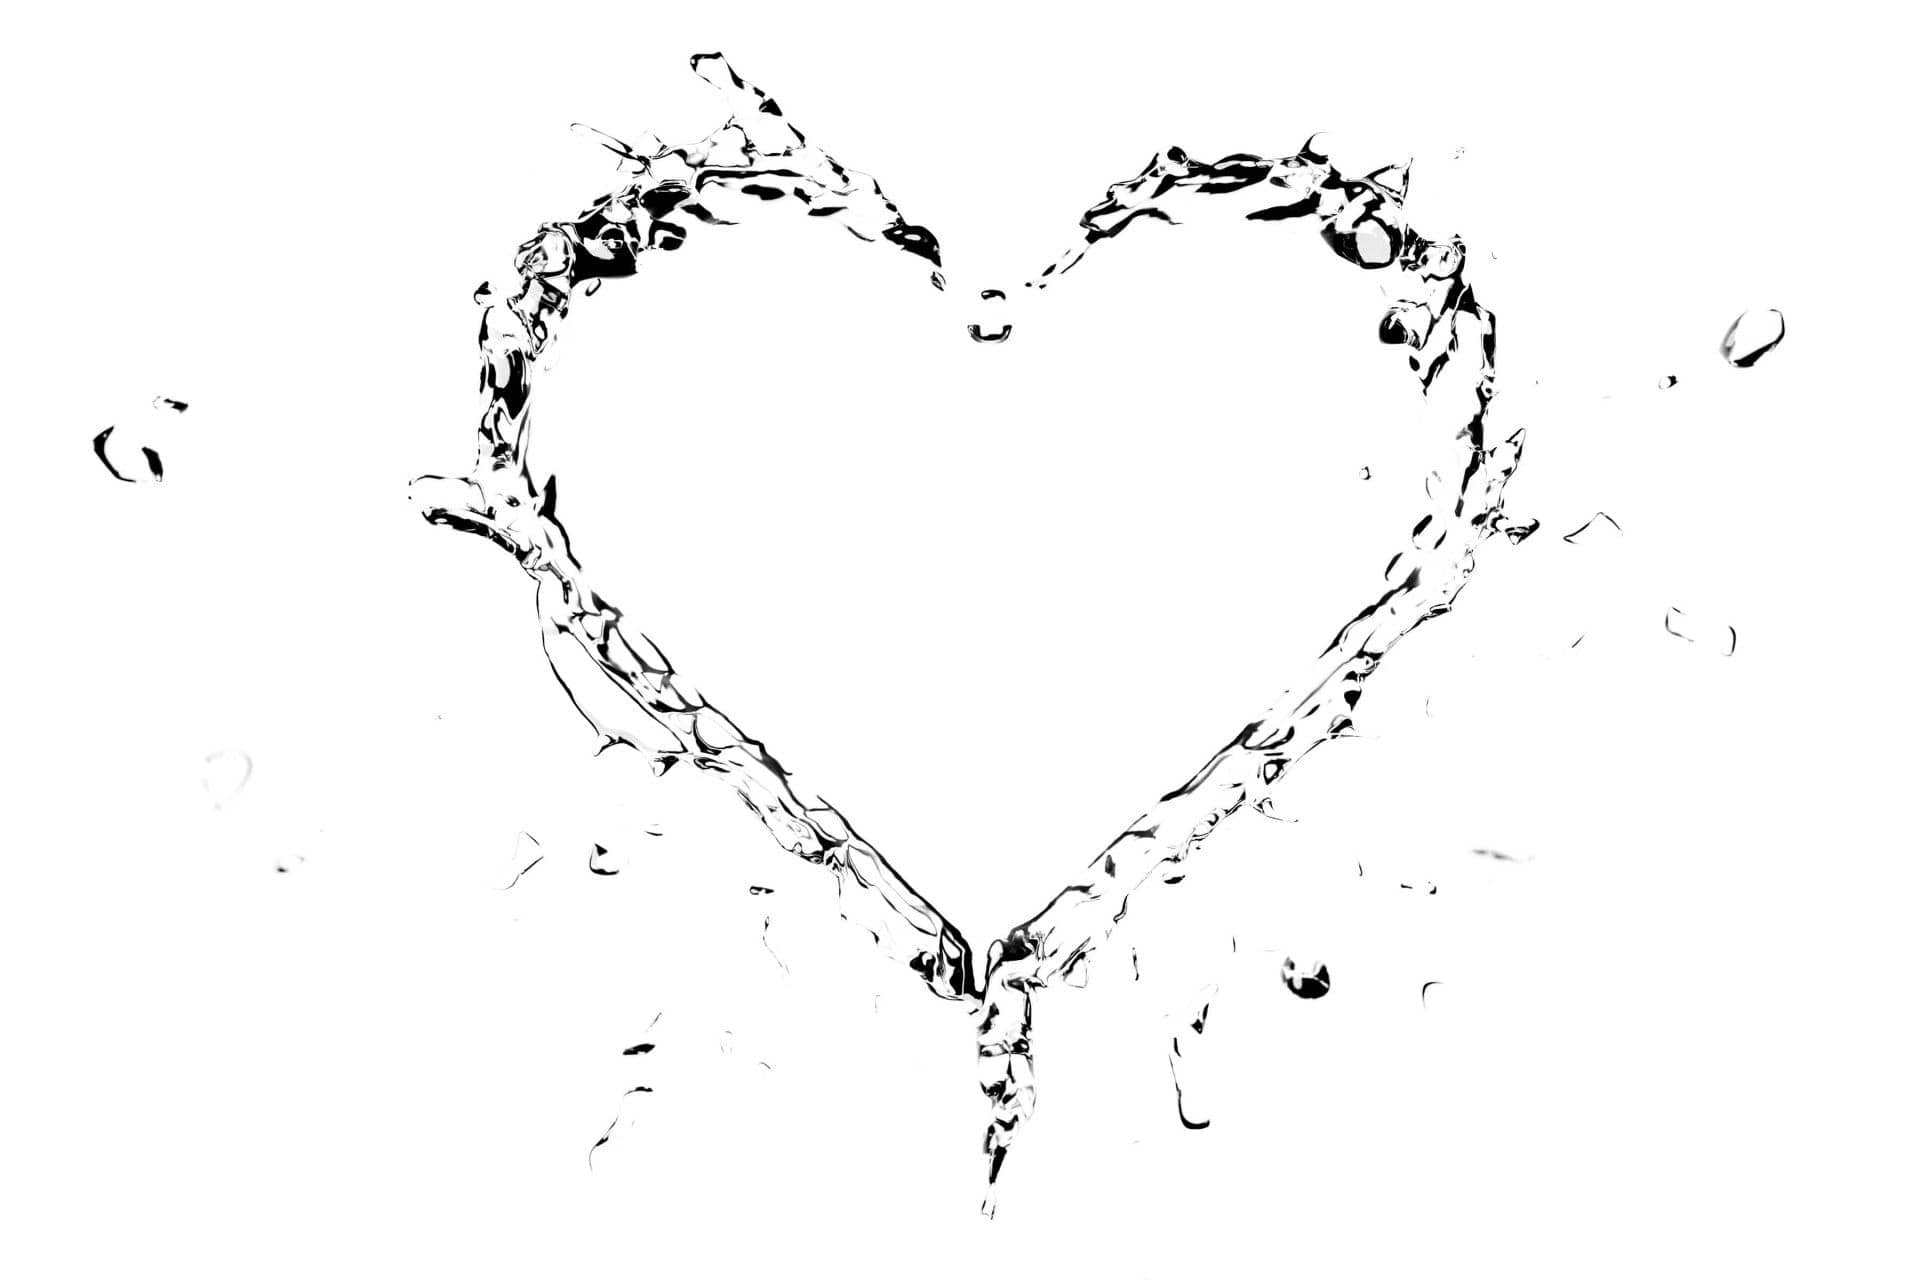 Splashes of water shaped like a heart